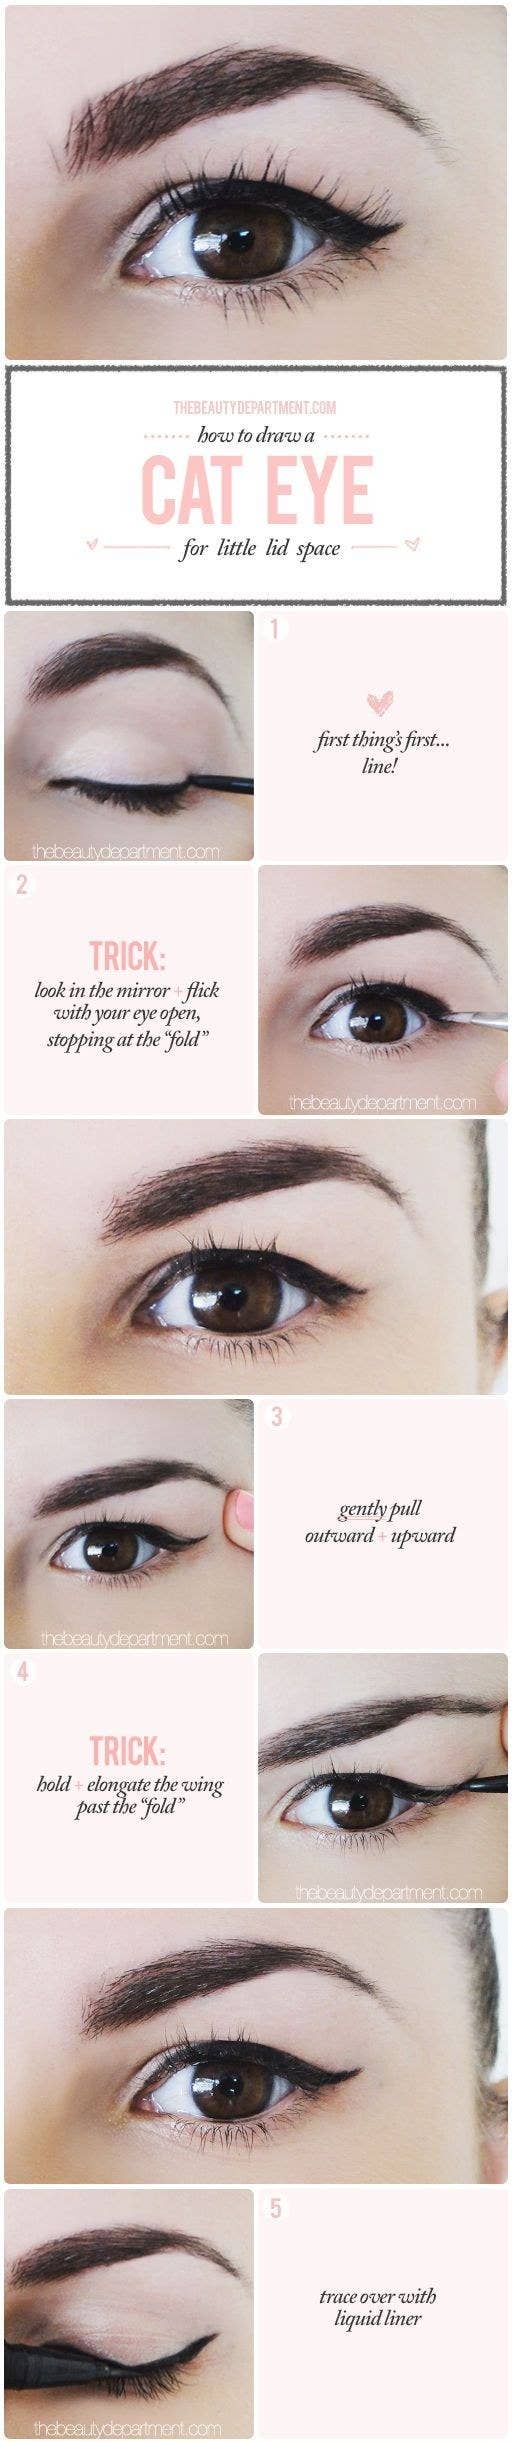 18 Amazing Makeup Tips For Hooded Eyes